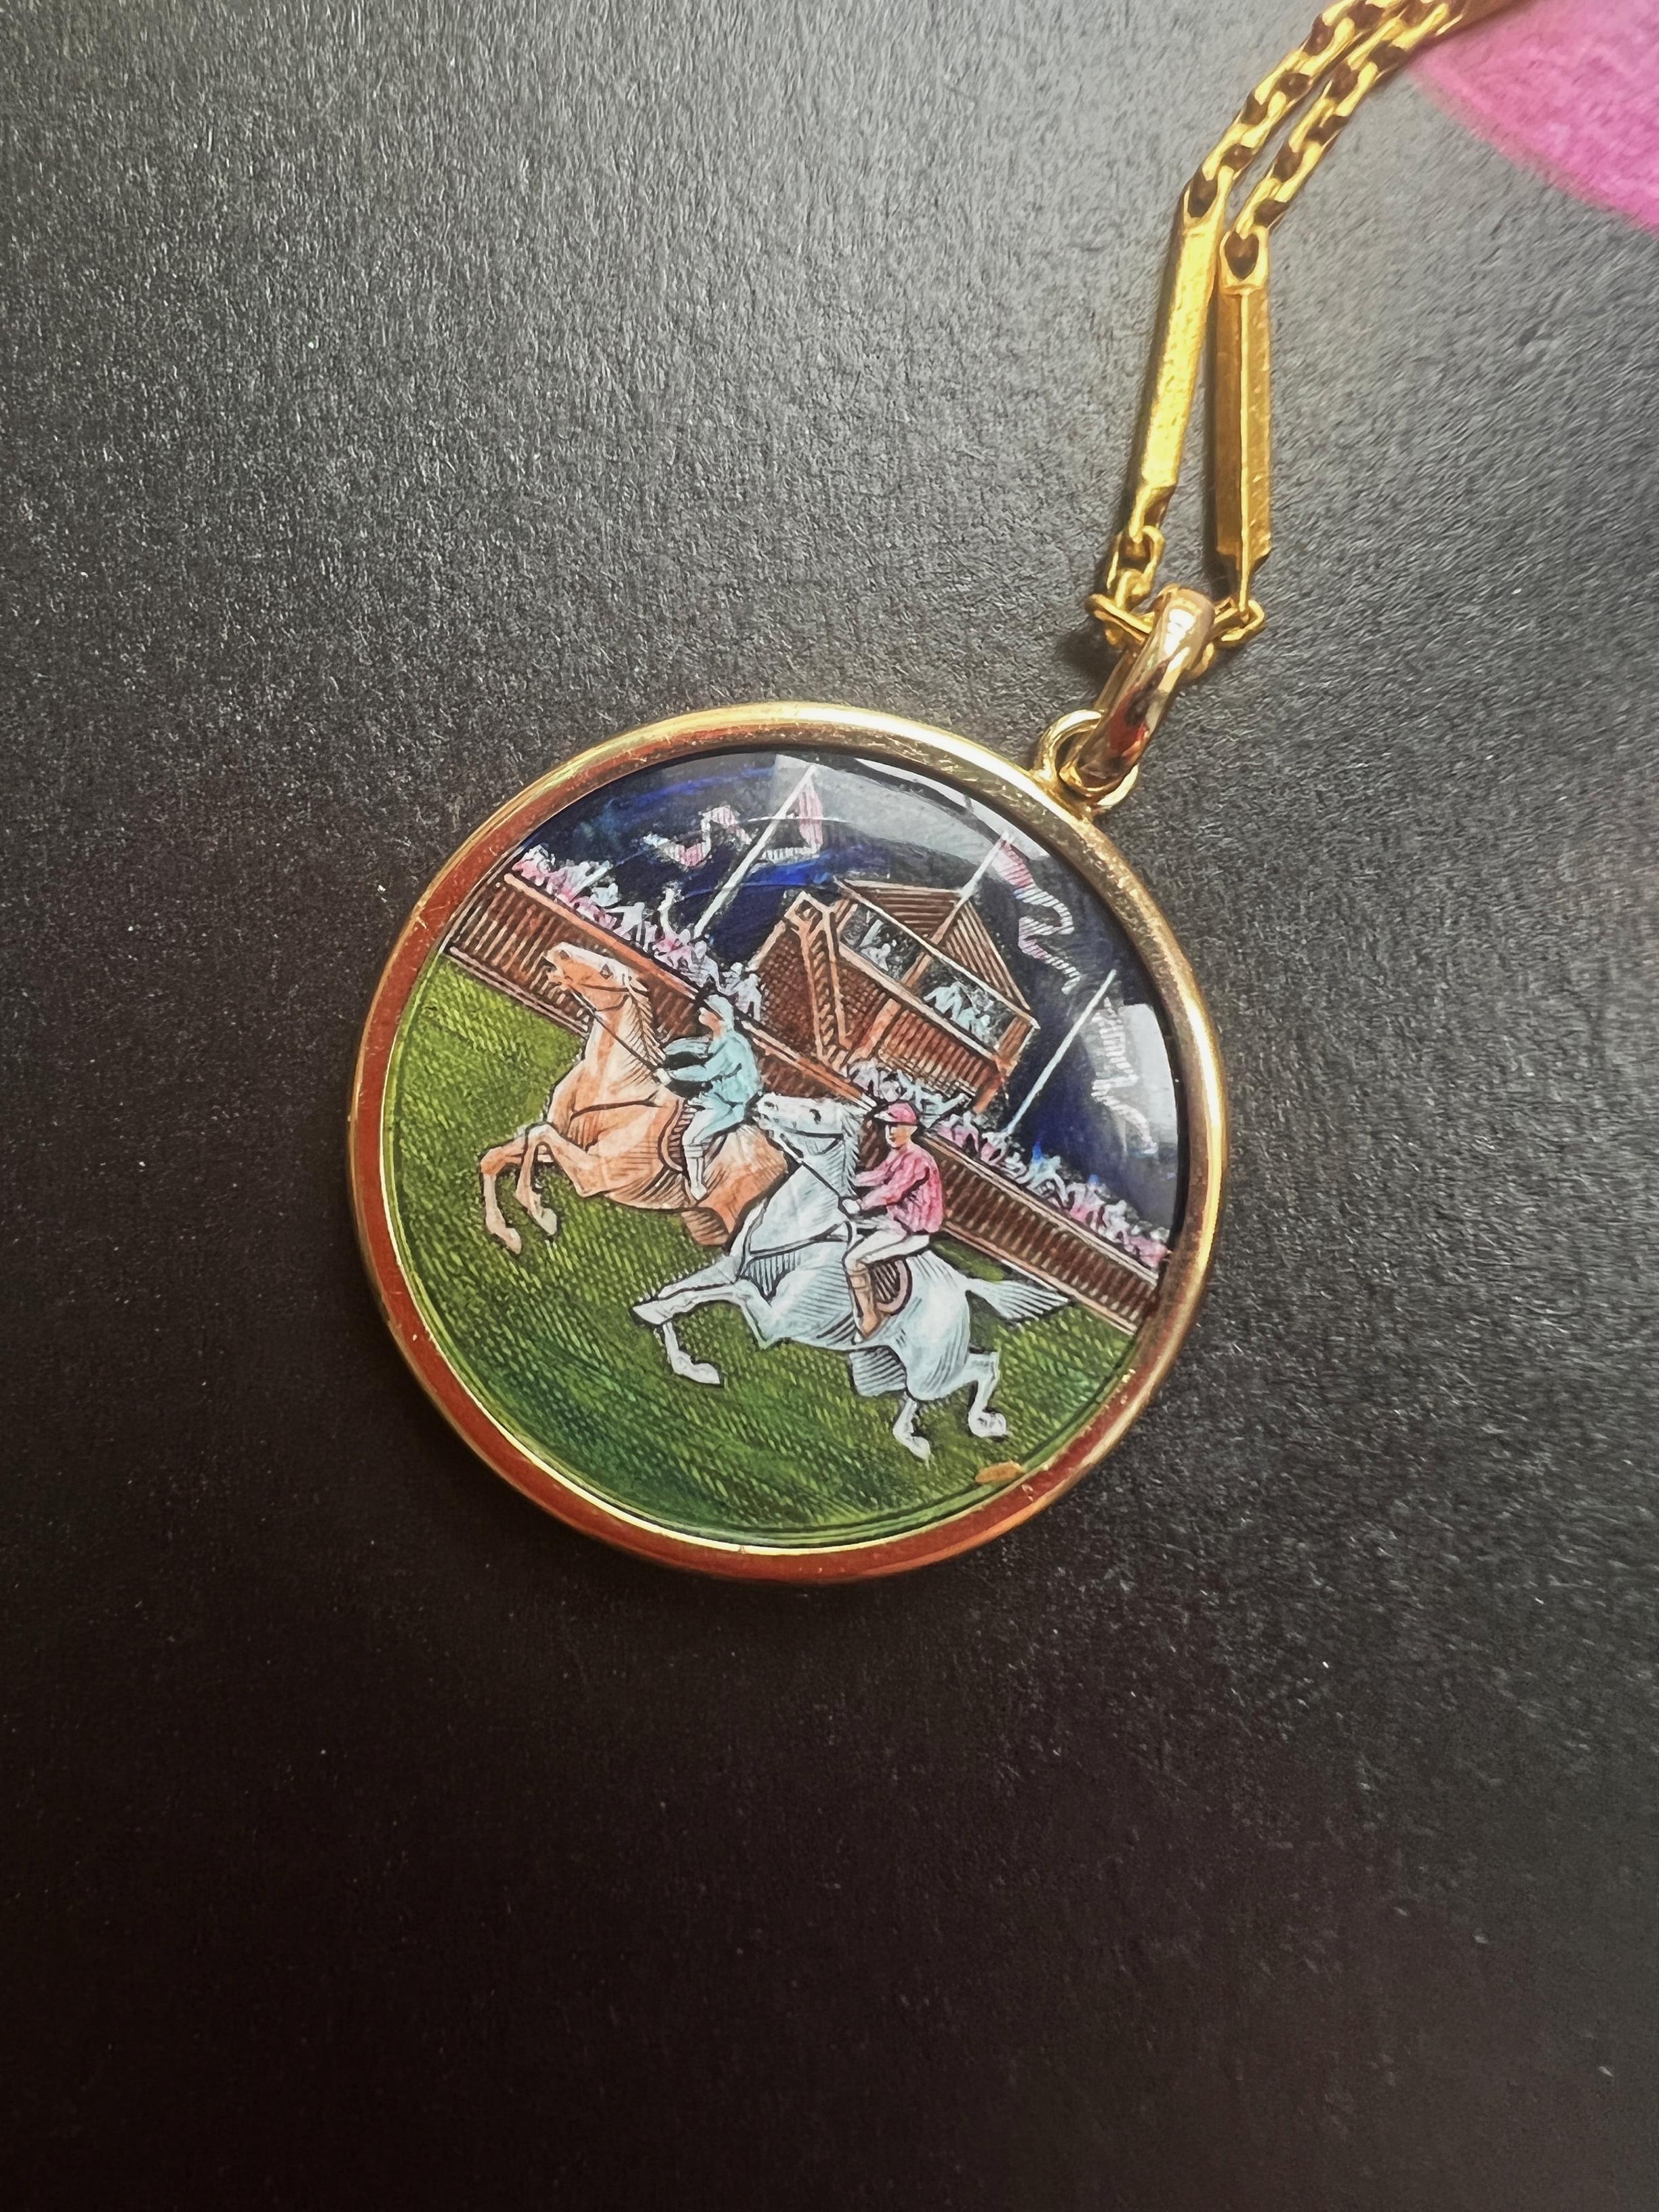 In front of us an intricate, colorful and rare enameled pendant, featuring a fierce horse race.

We see this pendant as an ultra refined work of art thanks to the beautiful hand painting which allows to trace the precise fine lines of the horses,